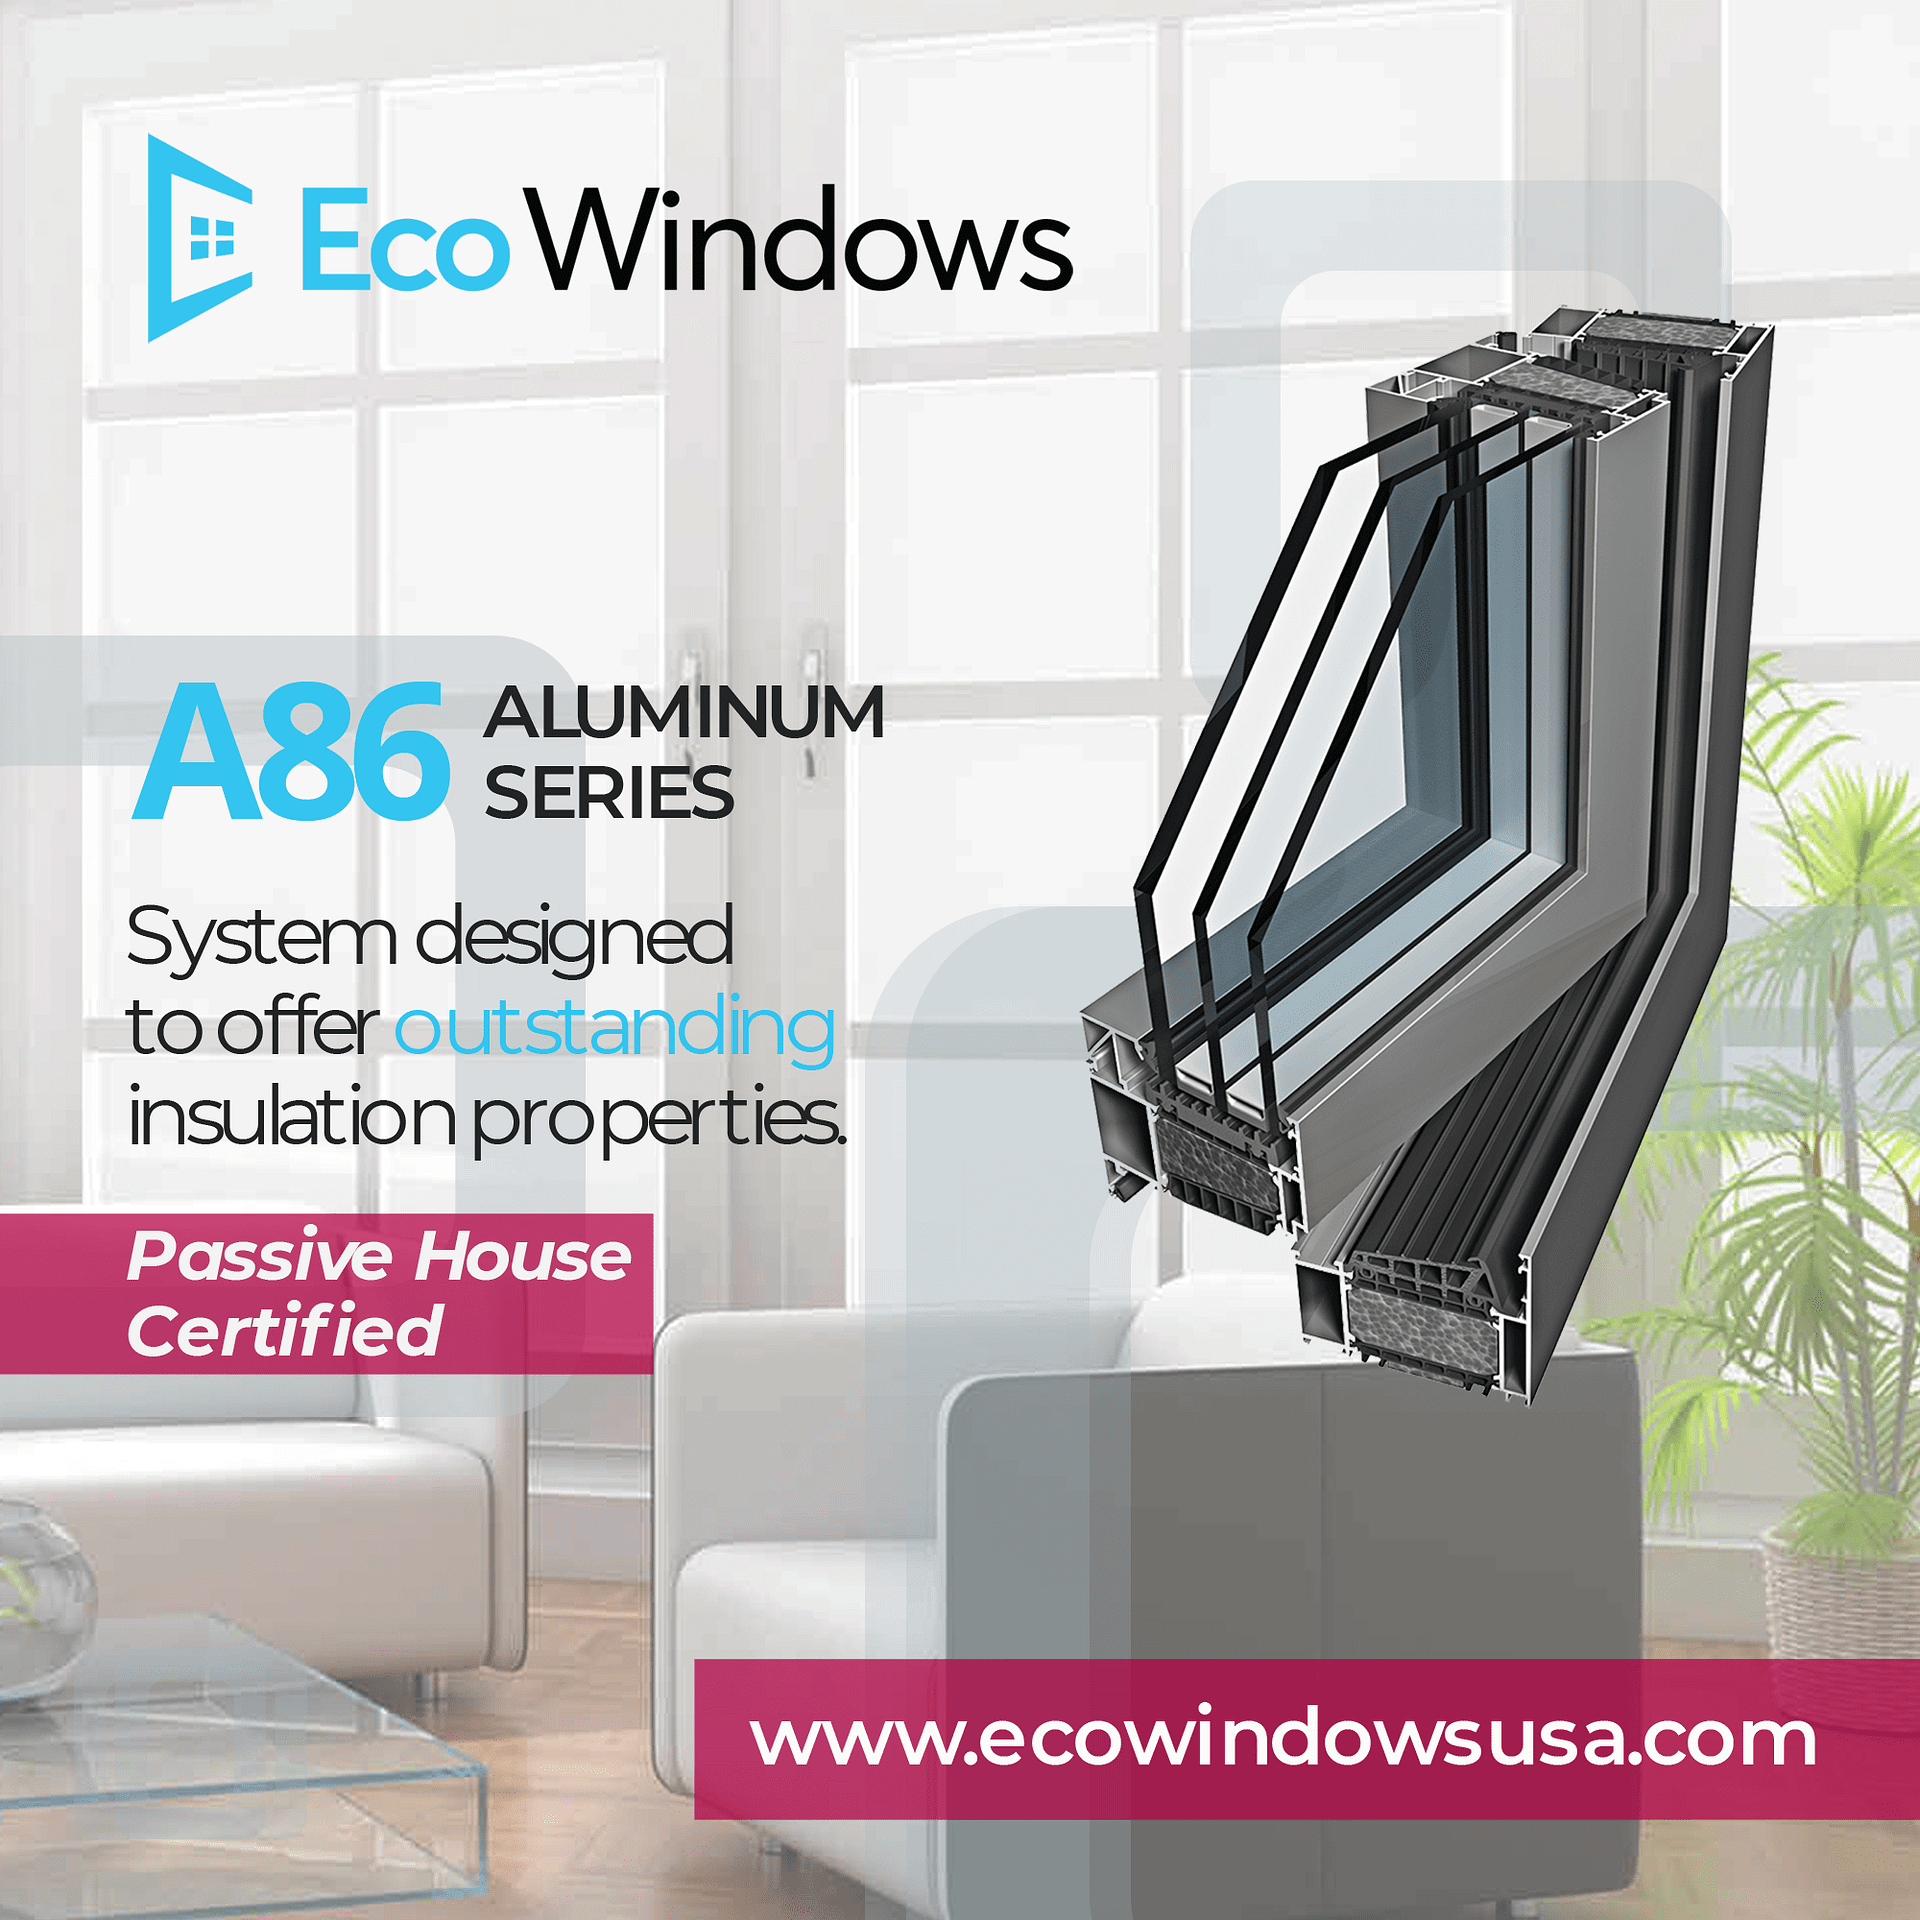 Windows and doors - A86 passive house system